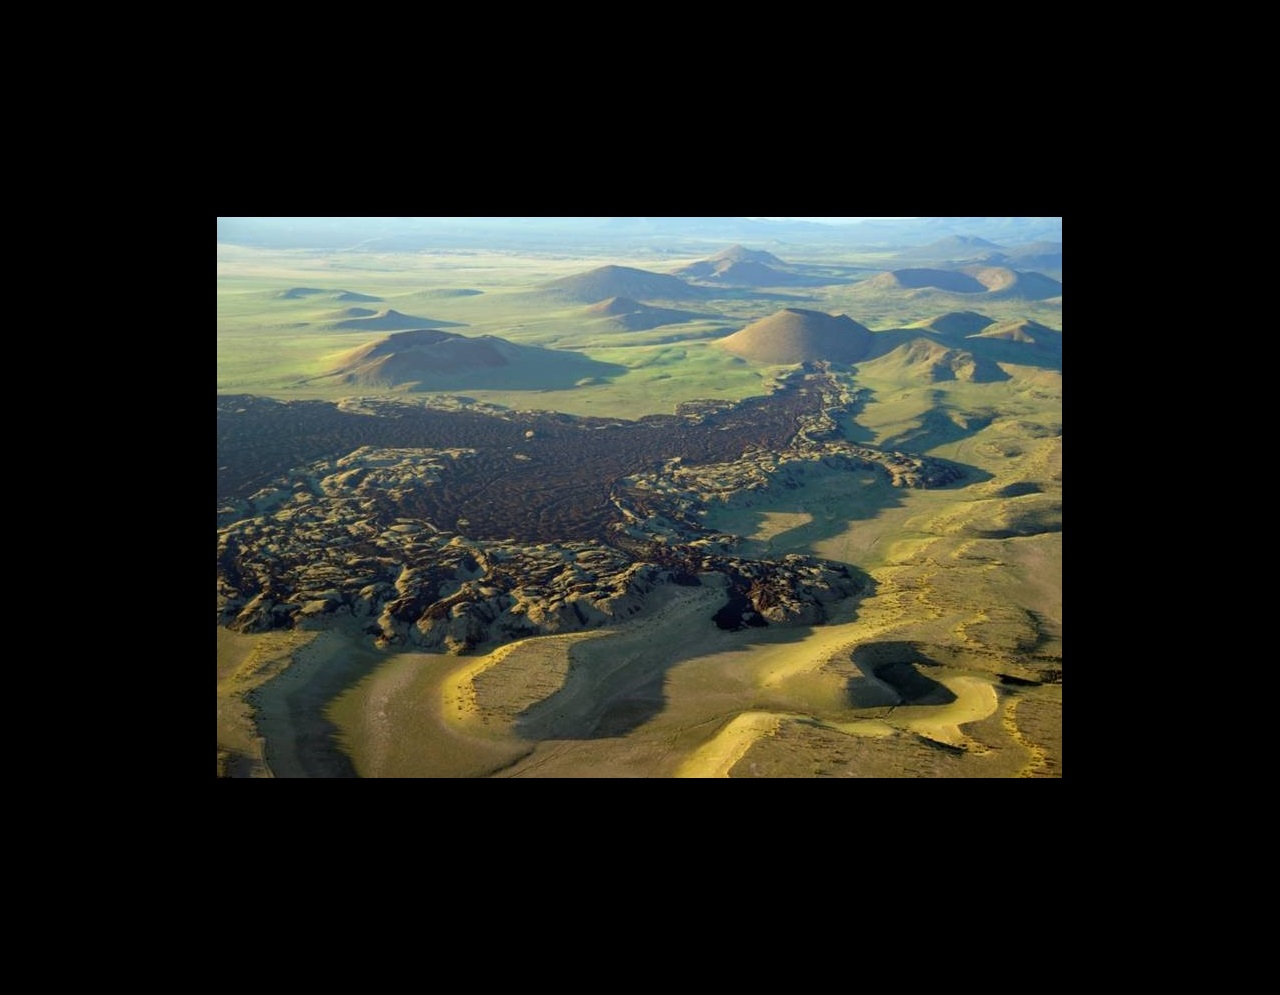 Aerial image of the San Francisco Volcanic Field